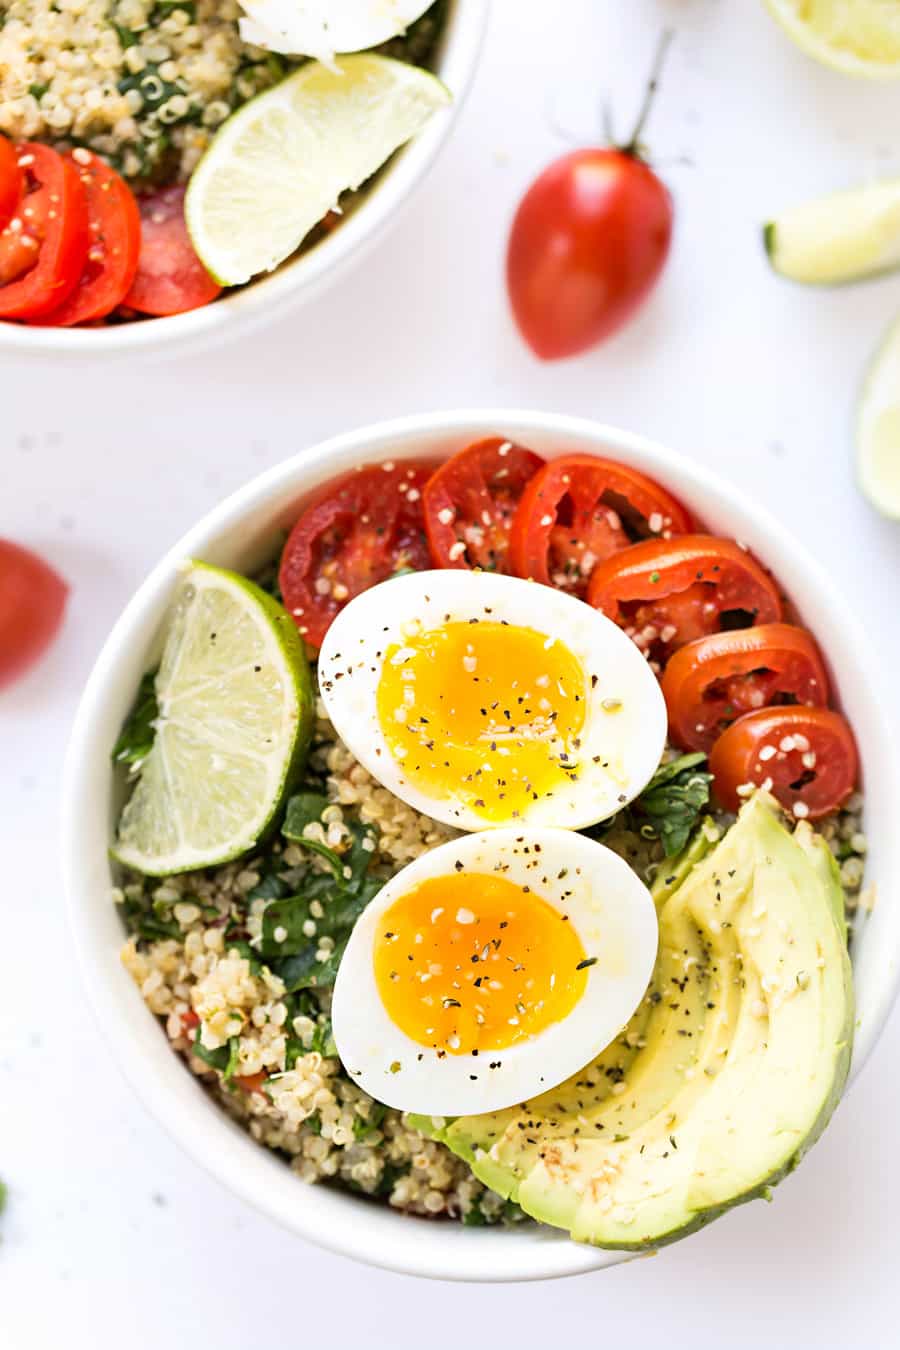 A mexican inspired Quinoa Breakfast Bowl with tomato, avocado and soft boil eggs!